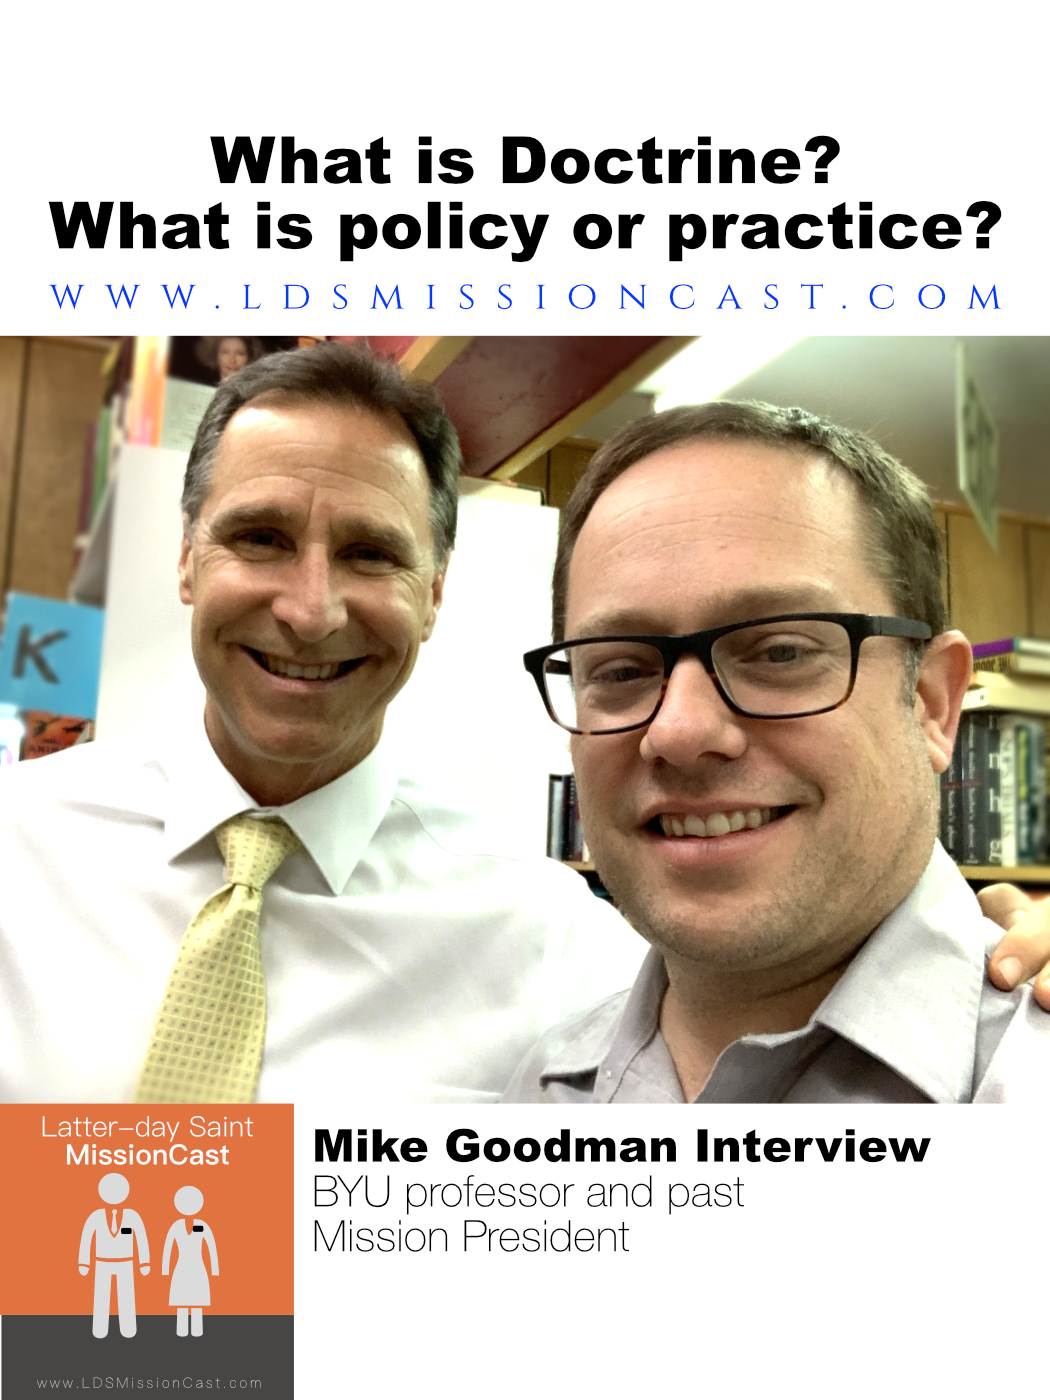 Mike Goodman Doctrine Policy Practice